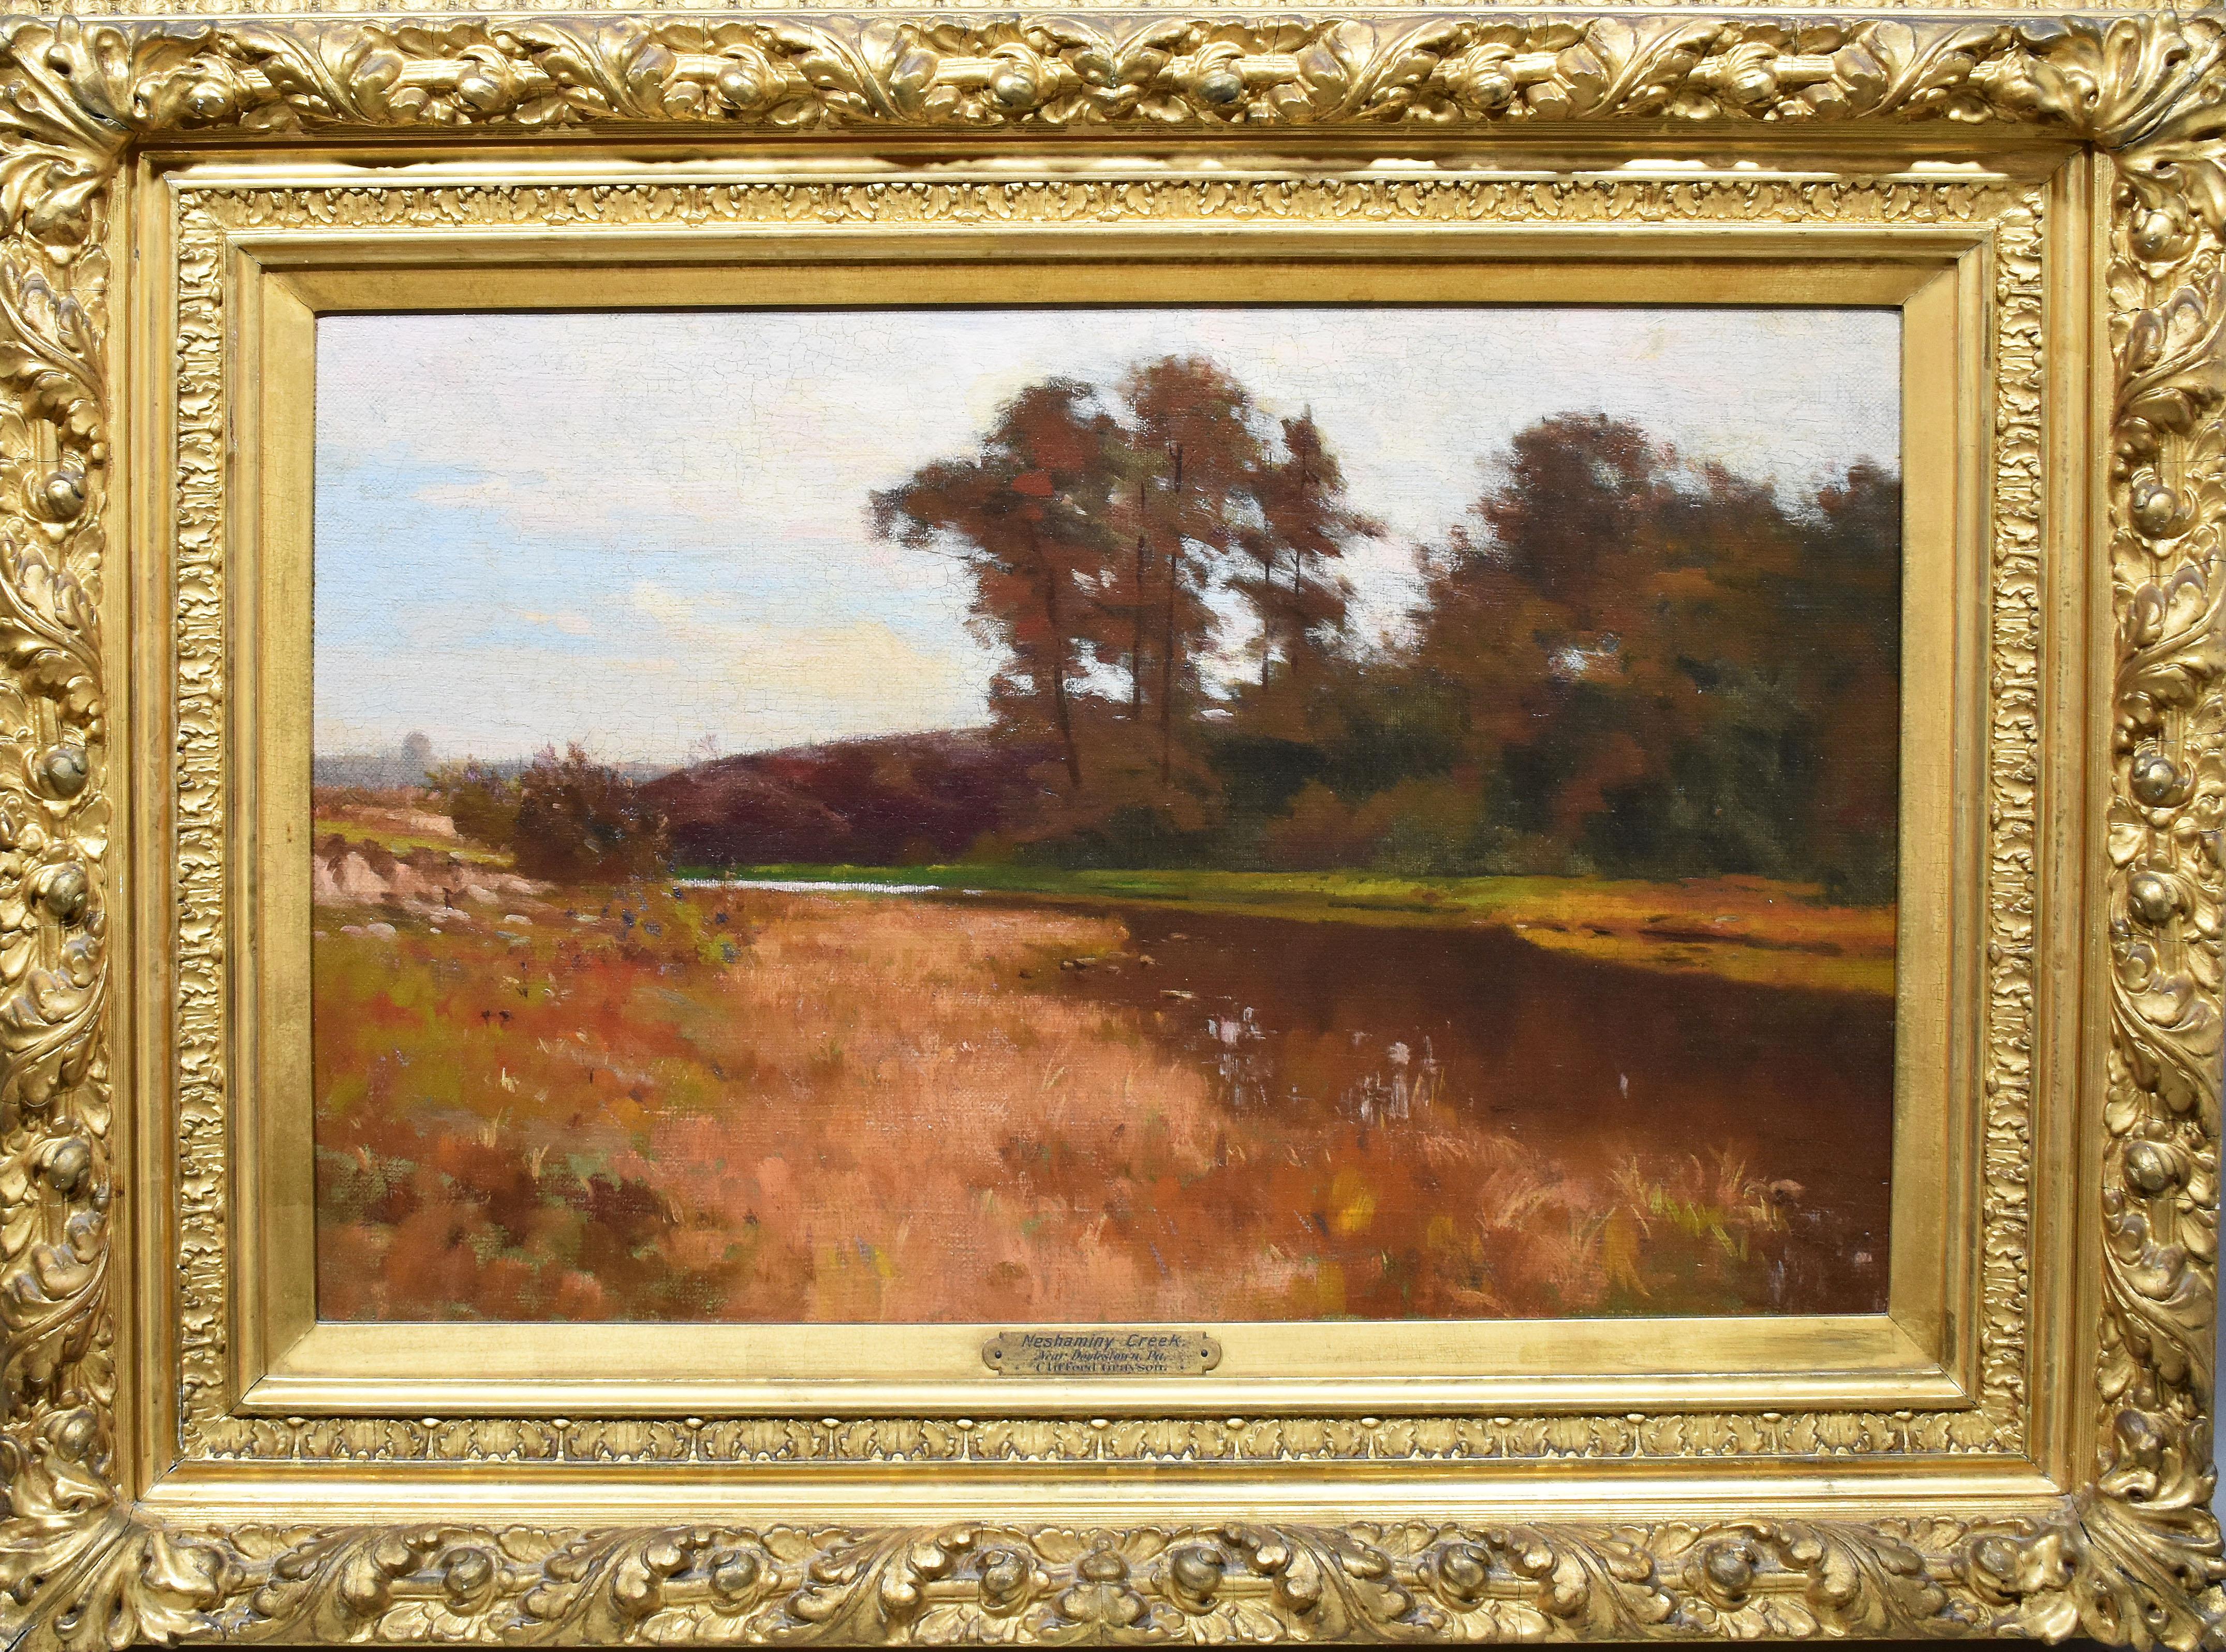 Clifford Prevost Grayson Landscape Painting - Antique American Impressionist Fall River Neshaminy Creek PA Signed Oil Painting